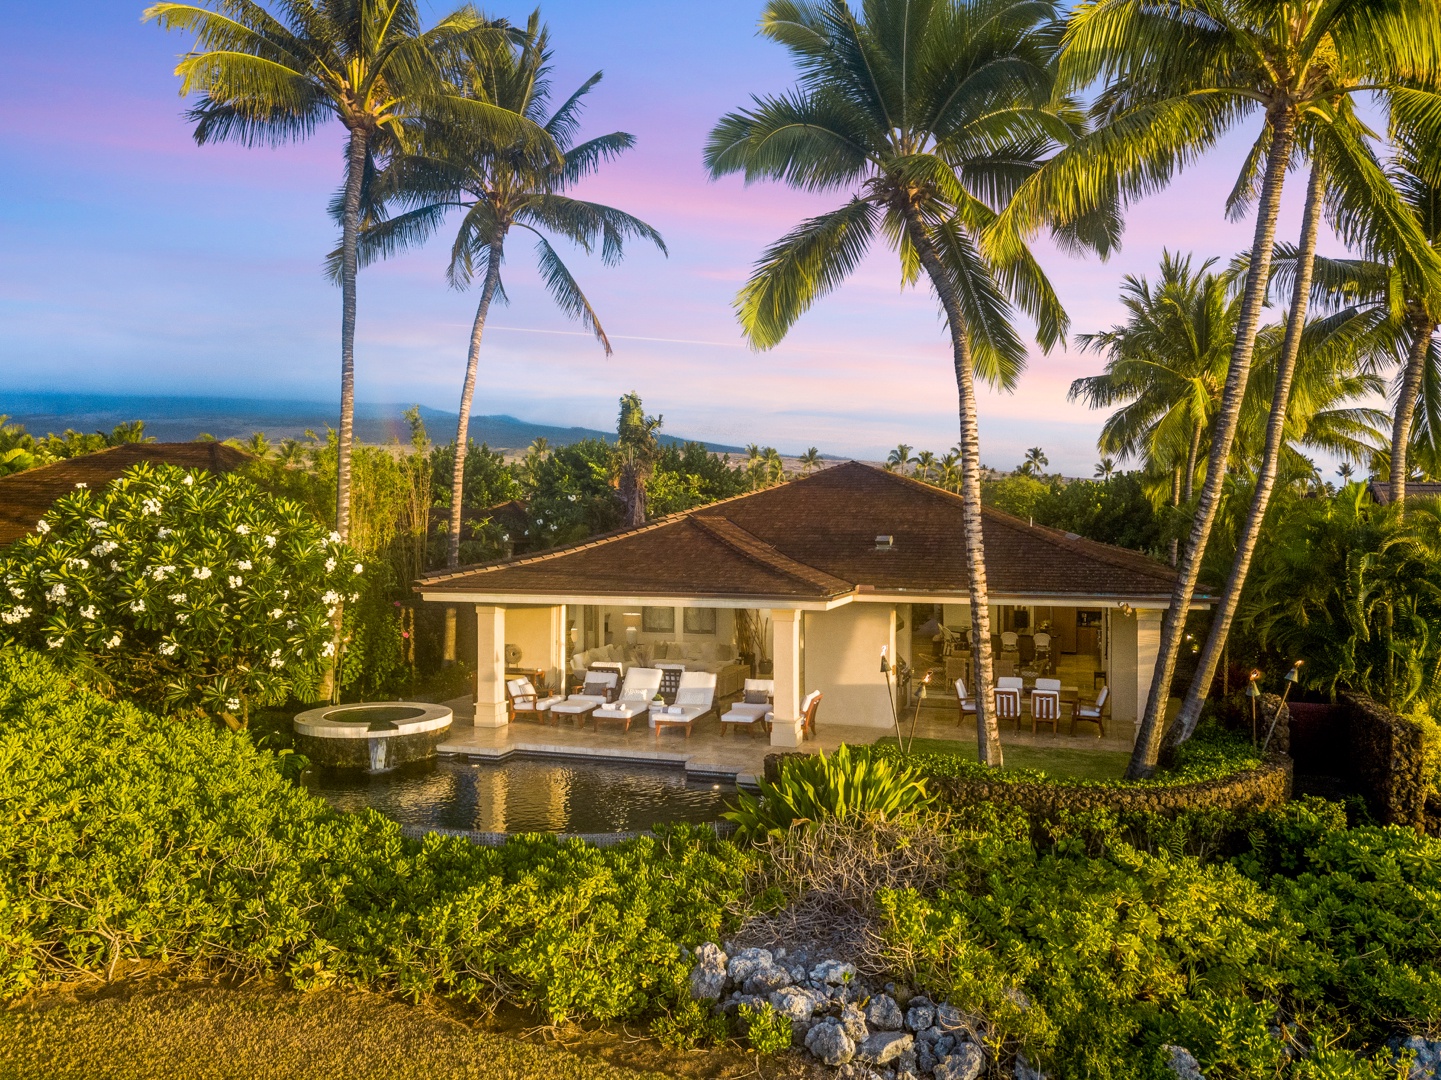 Kailua Kona Vacation Rentals, 4BD Pakui Street (147) Estate Home at Four Seasons Resort at Hualalai - Year round magnificent sunset views from this private oasis.